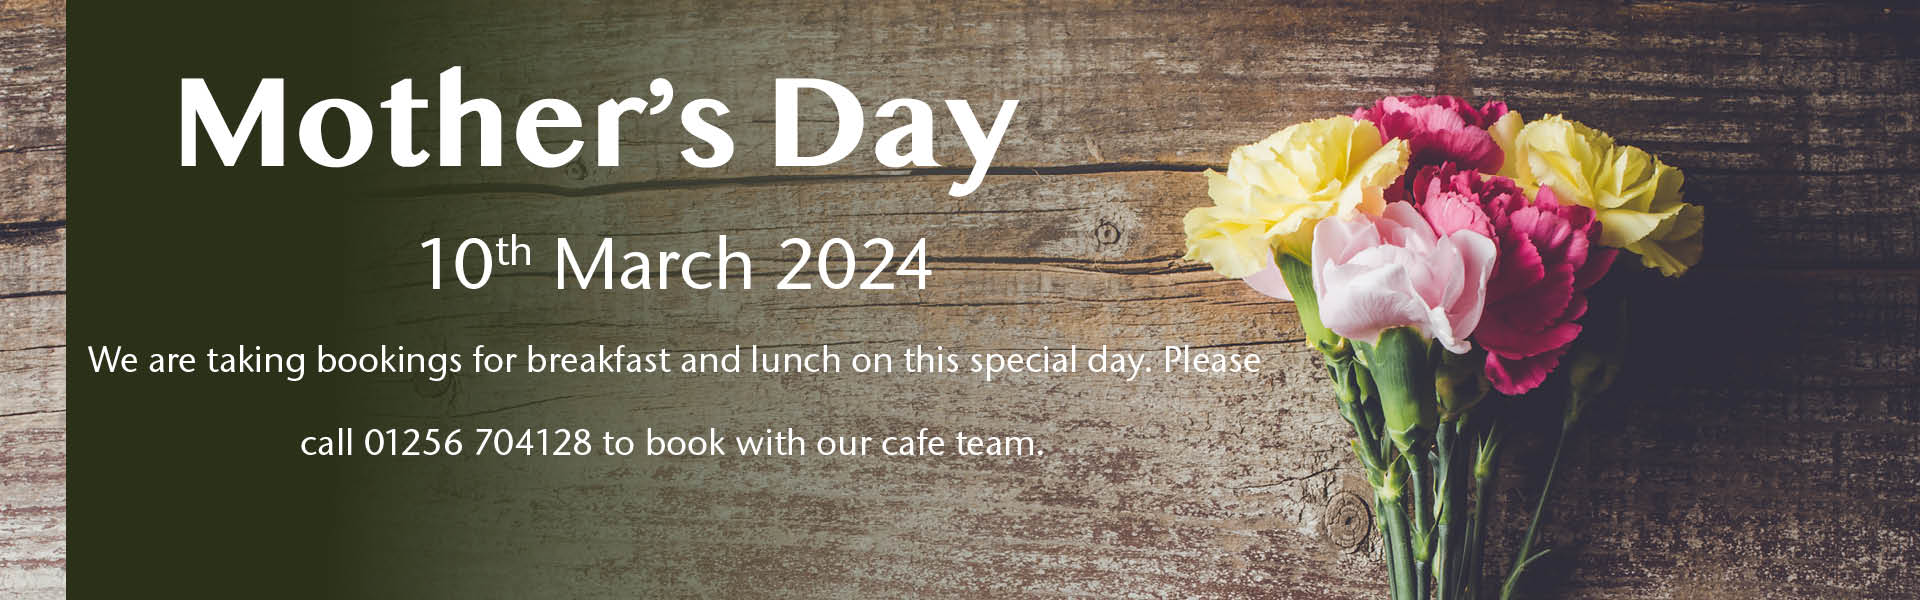 Mothers Day Banner 2024123